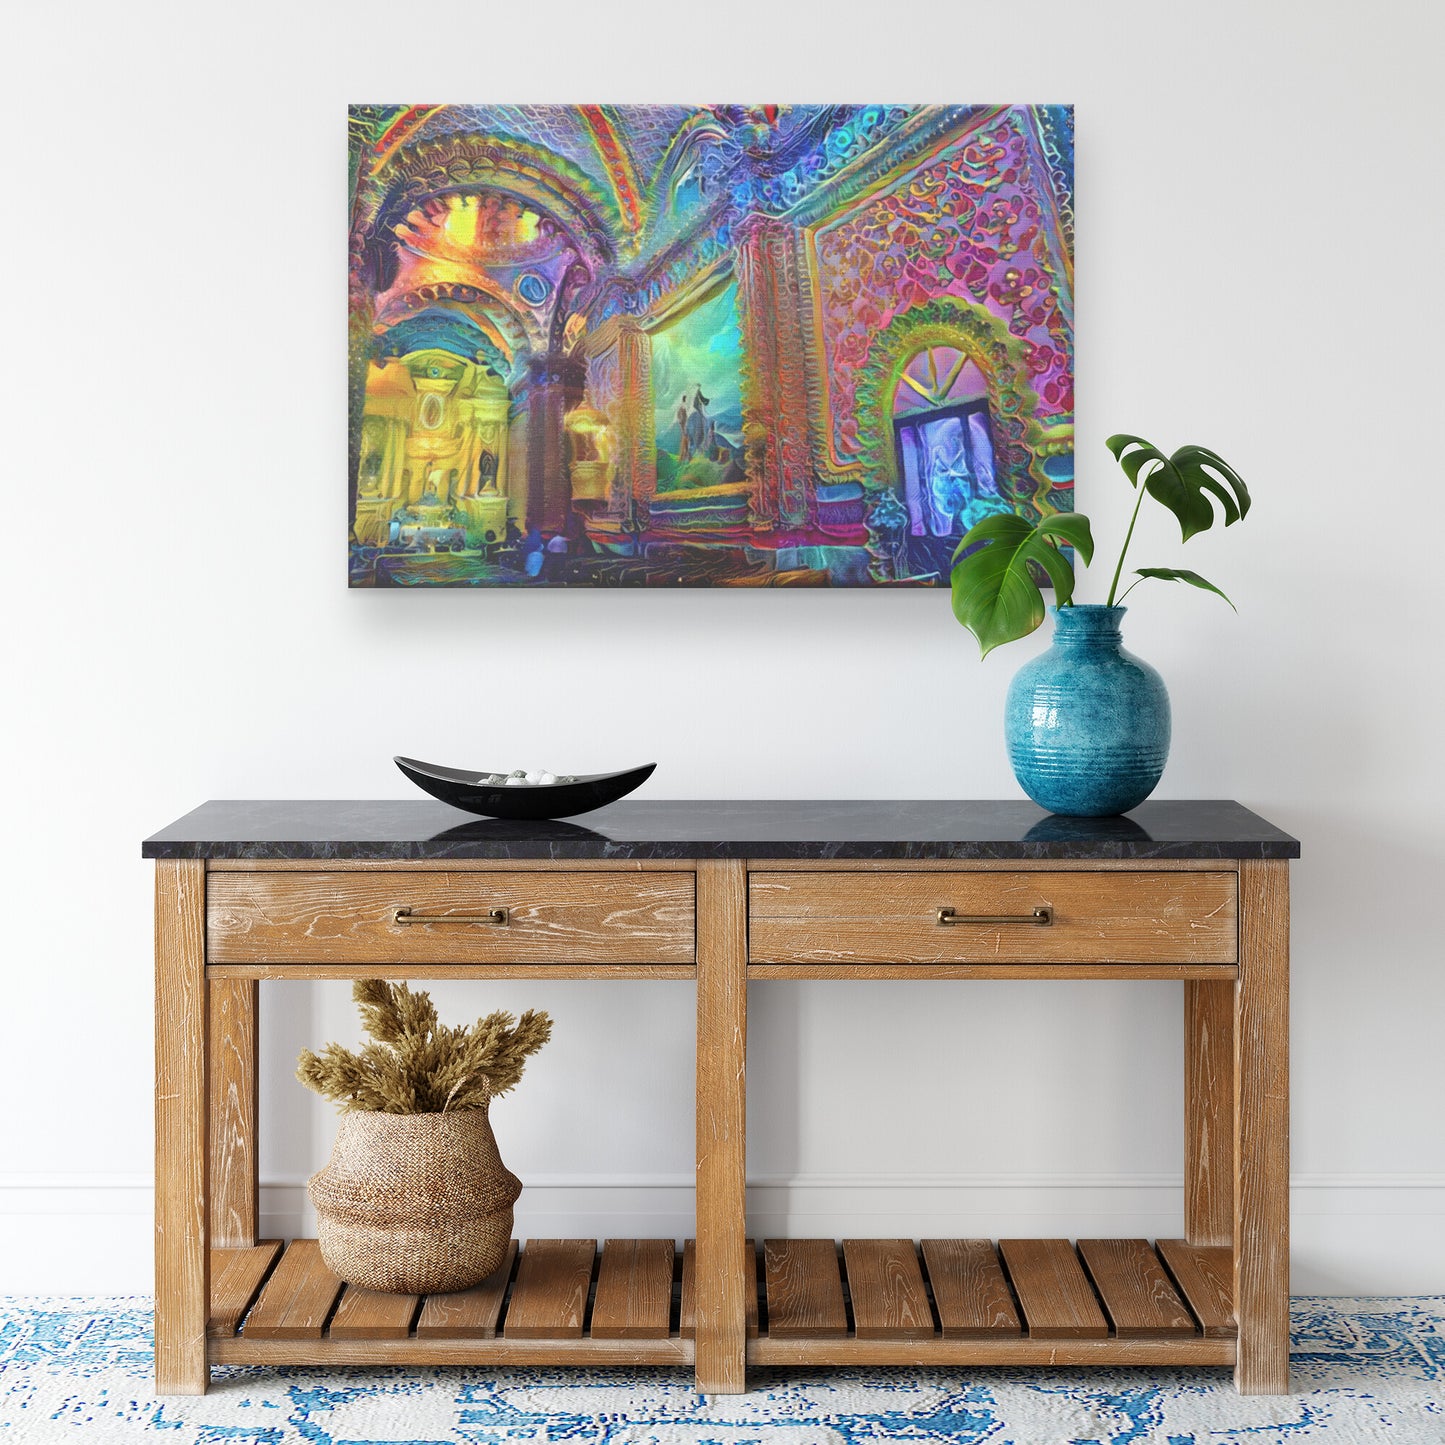 Morelia Cathedral, Colorful AI Cathedral Art